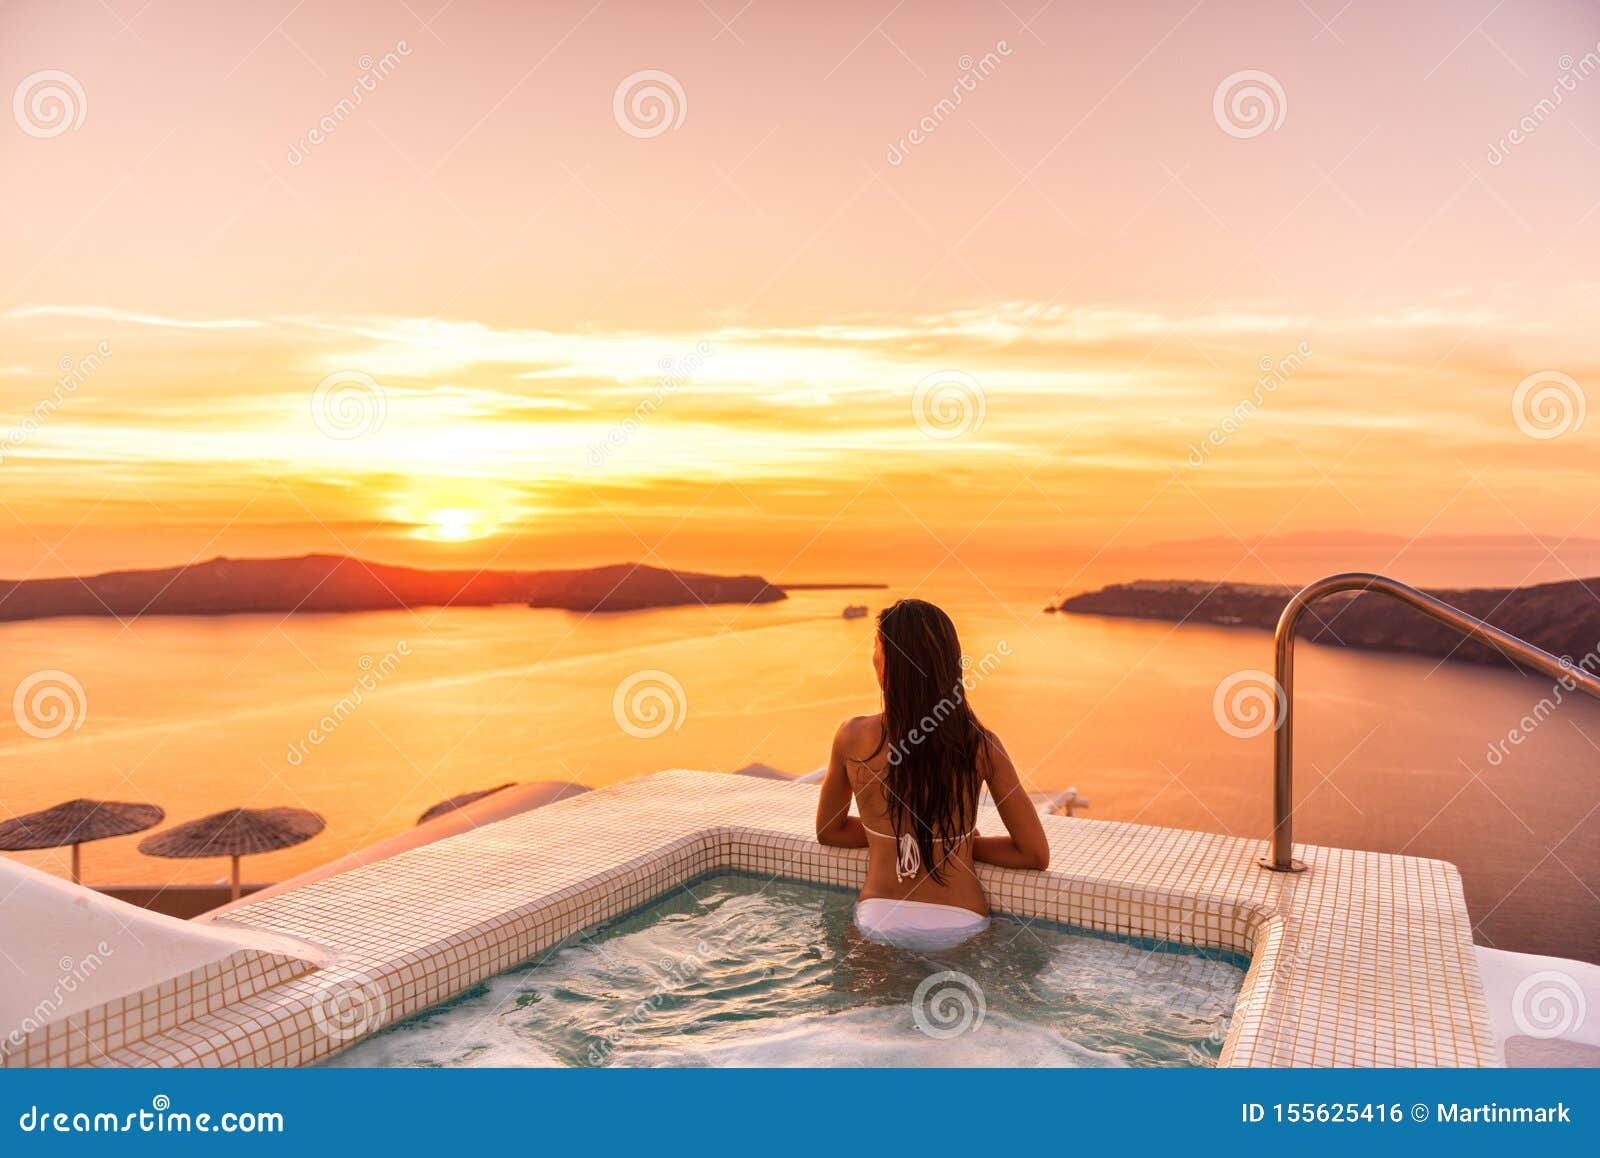 Luxury Travel Santorini Vacation Woman Swimming in Hotel Jacuzzi